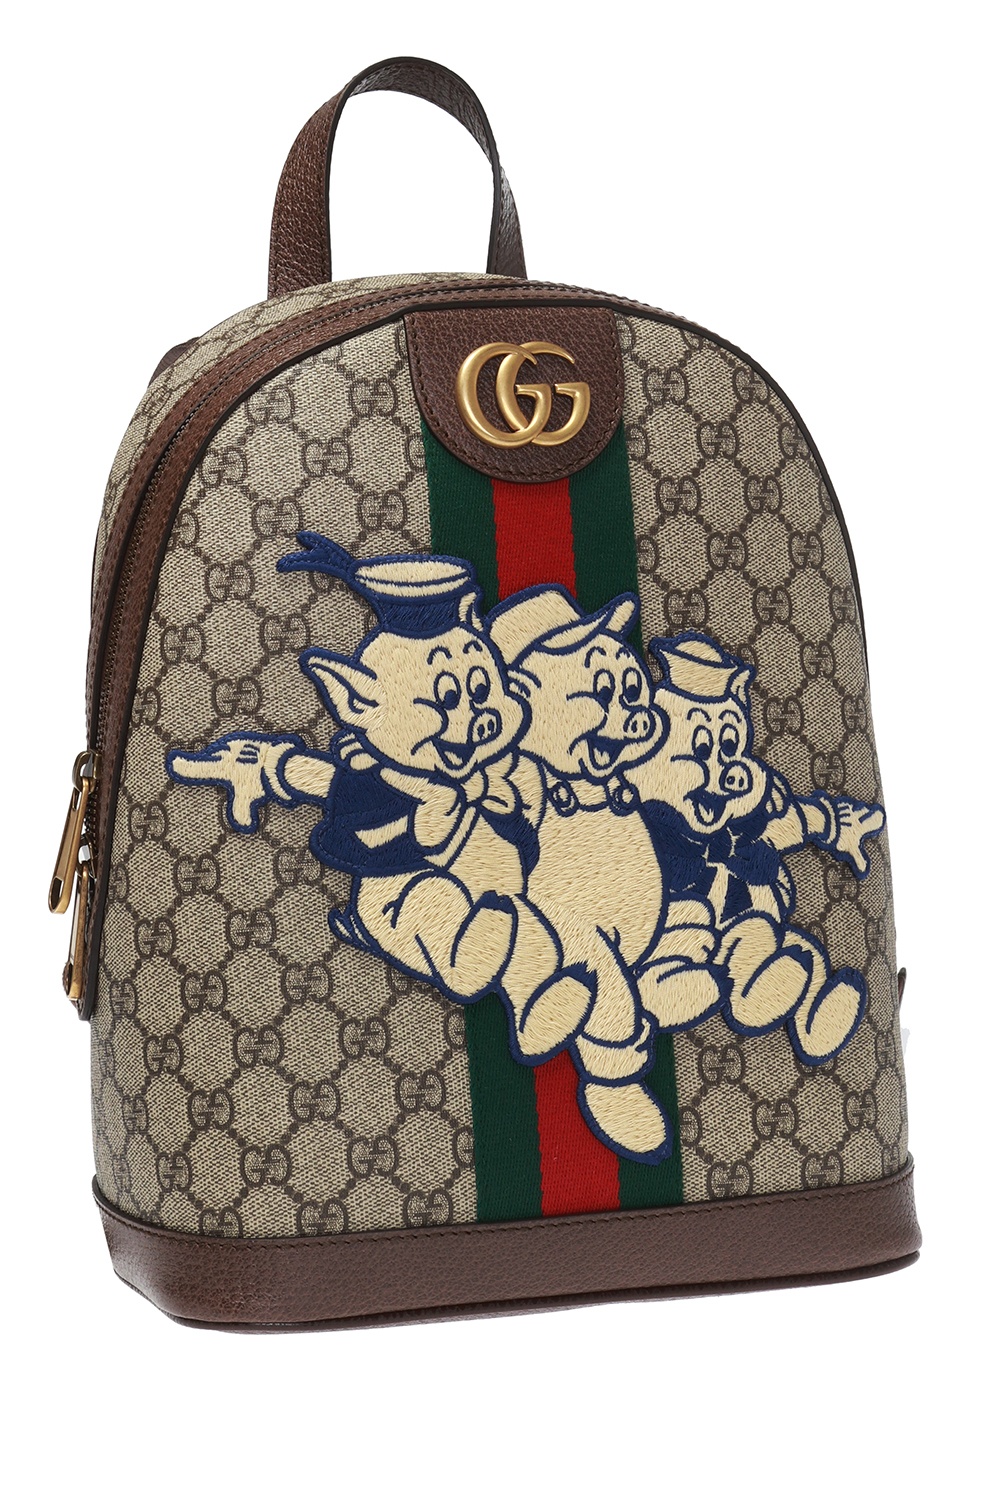 gucci backpack 3 little pigs